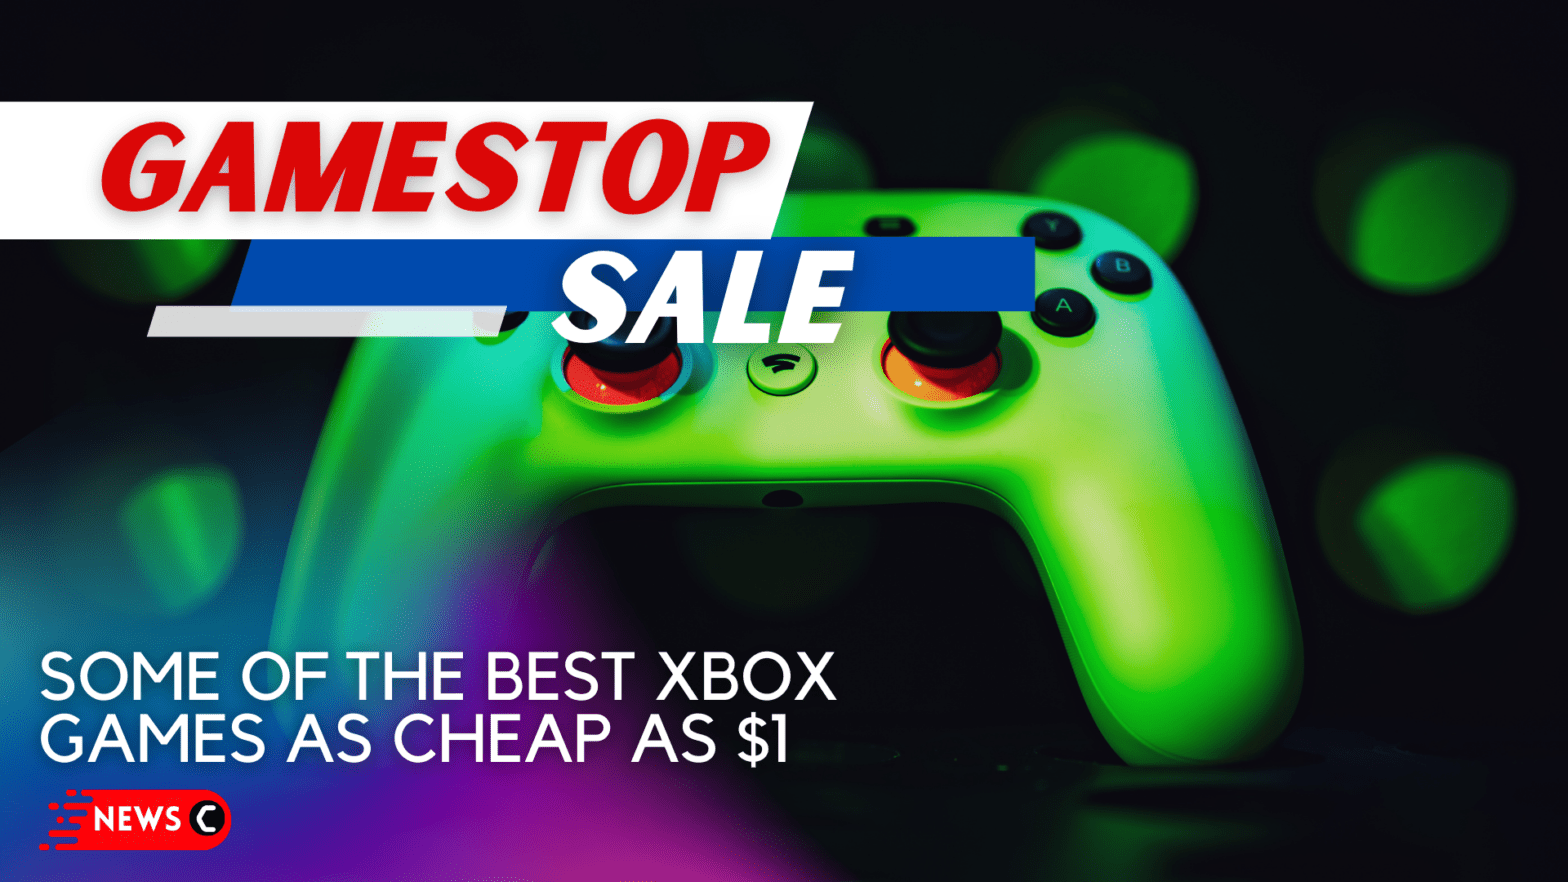 GameStop Makes Some of the Best Xbox Games as Cheap as $1: Hurry Up Now